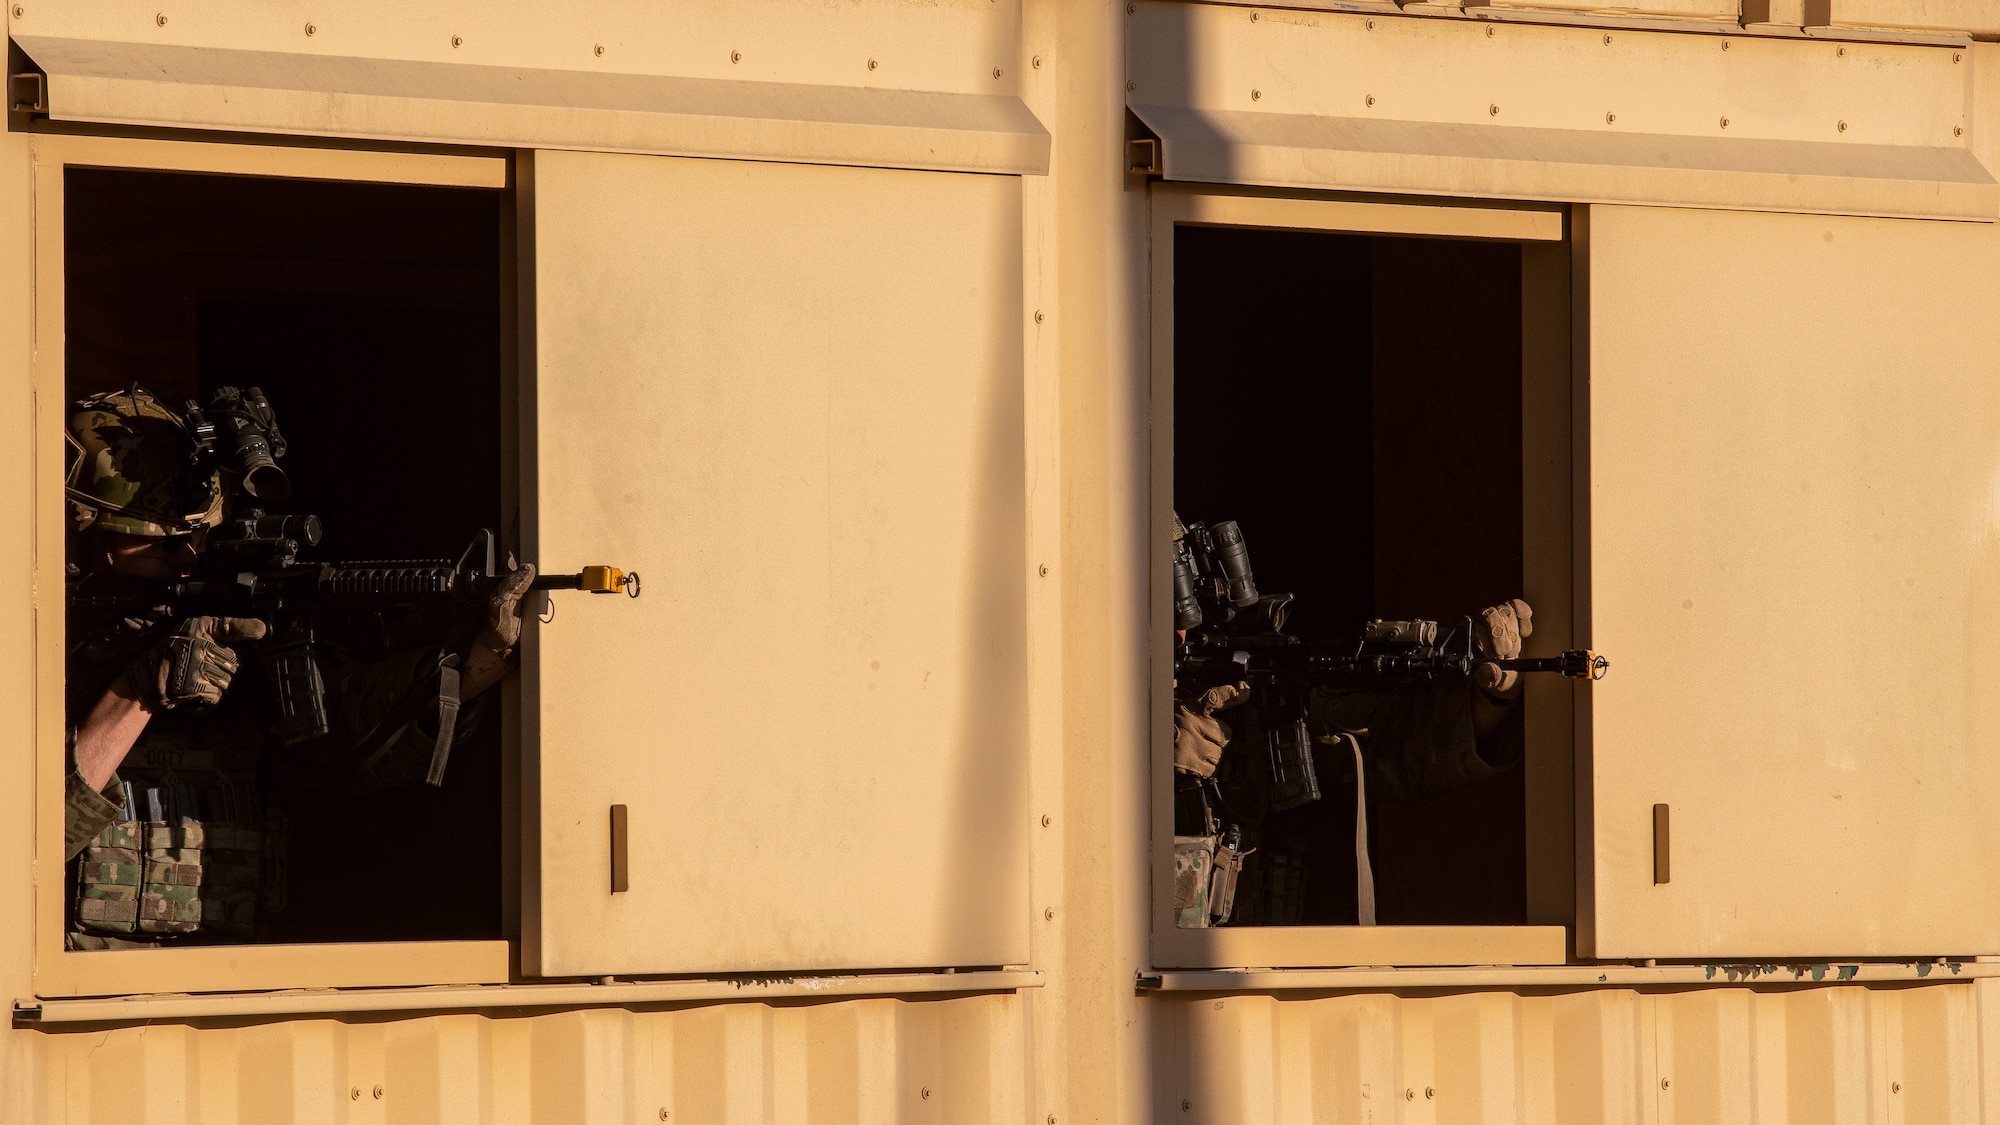 Two Airmen point rifles side-by-side windows of a metal building.